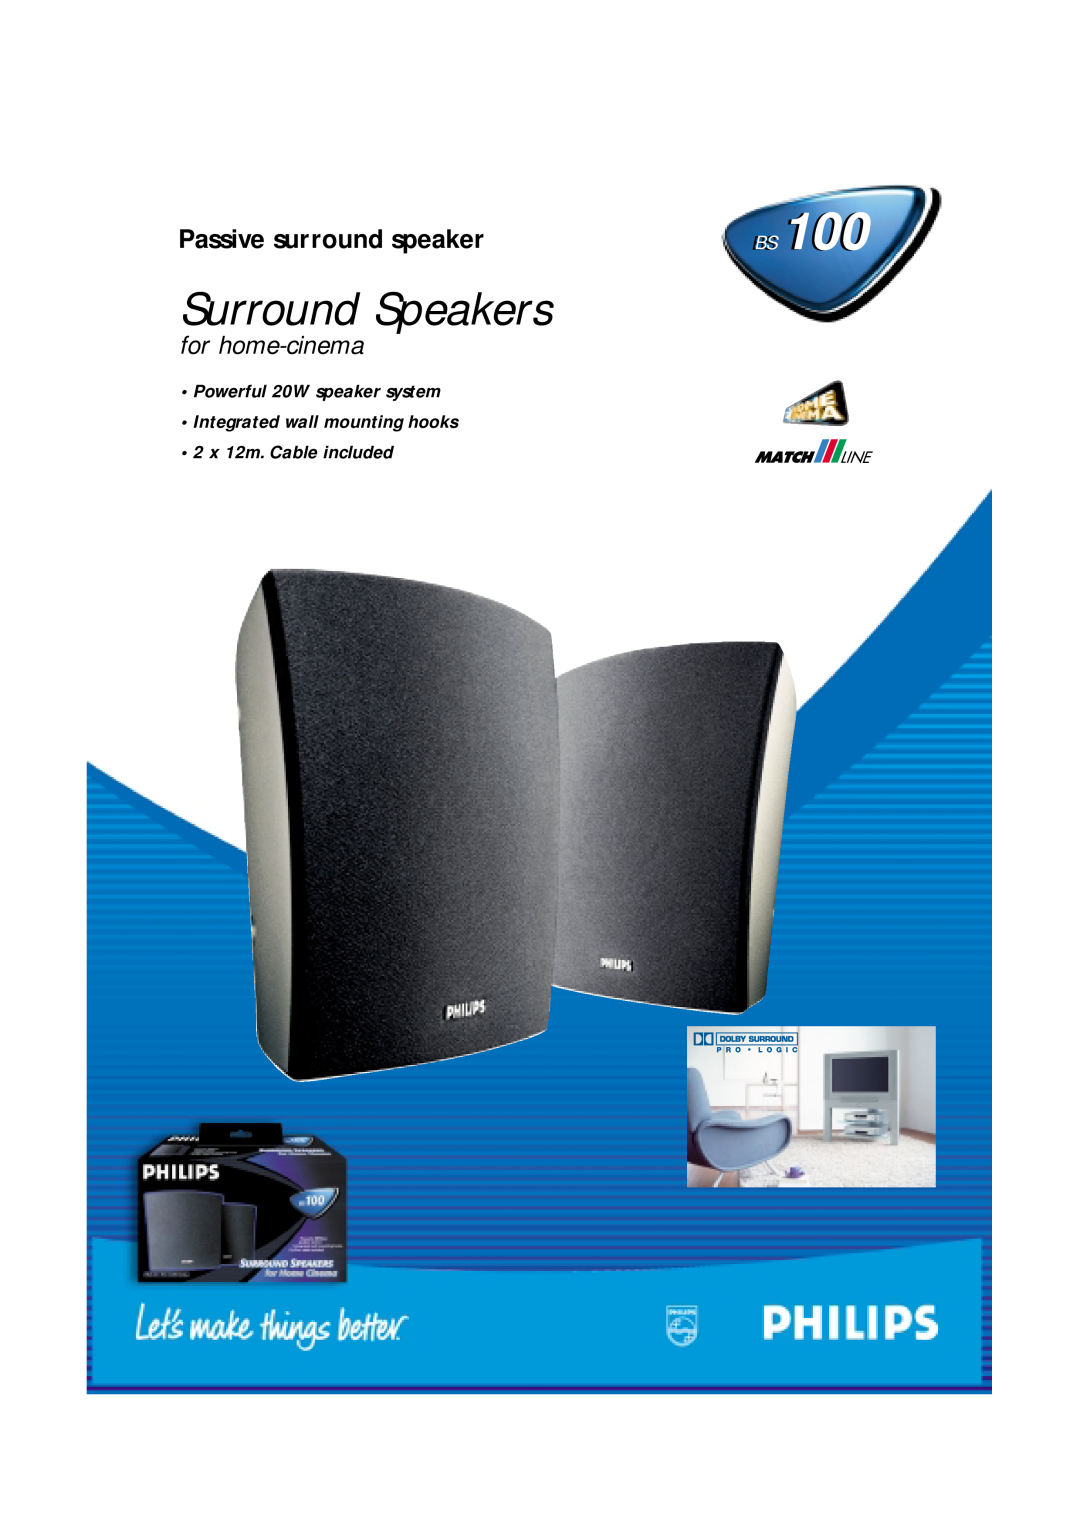 Philips BS100 manual Surround Speakers, for home-cinema, Passive surround speaker, Powerful 20W speaker system 